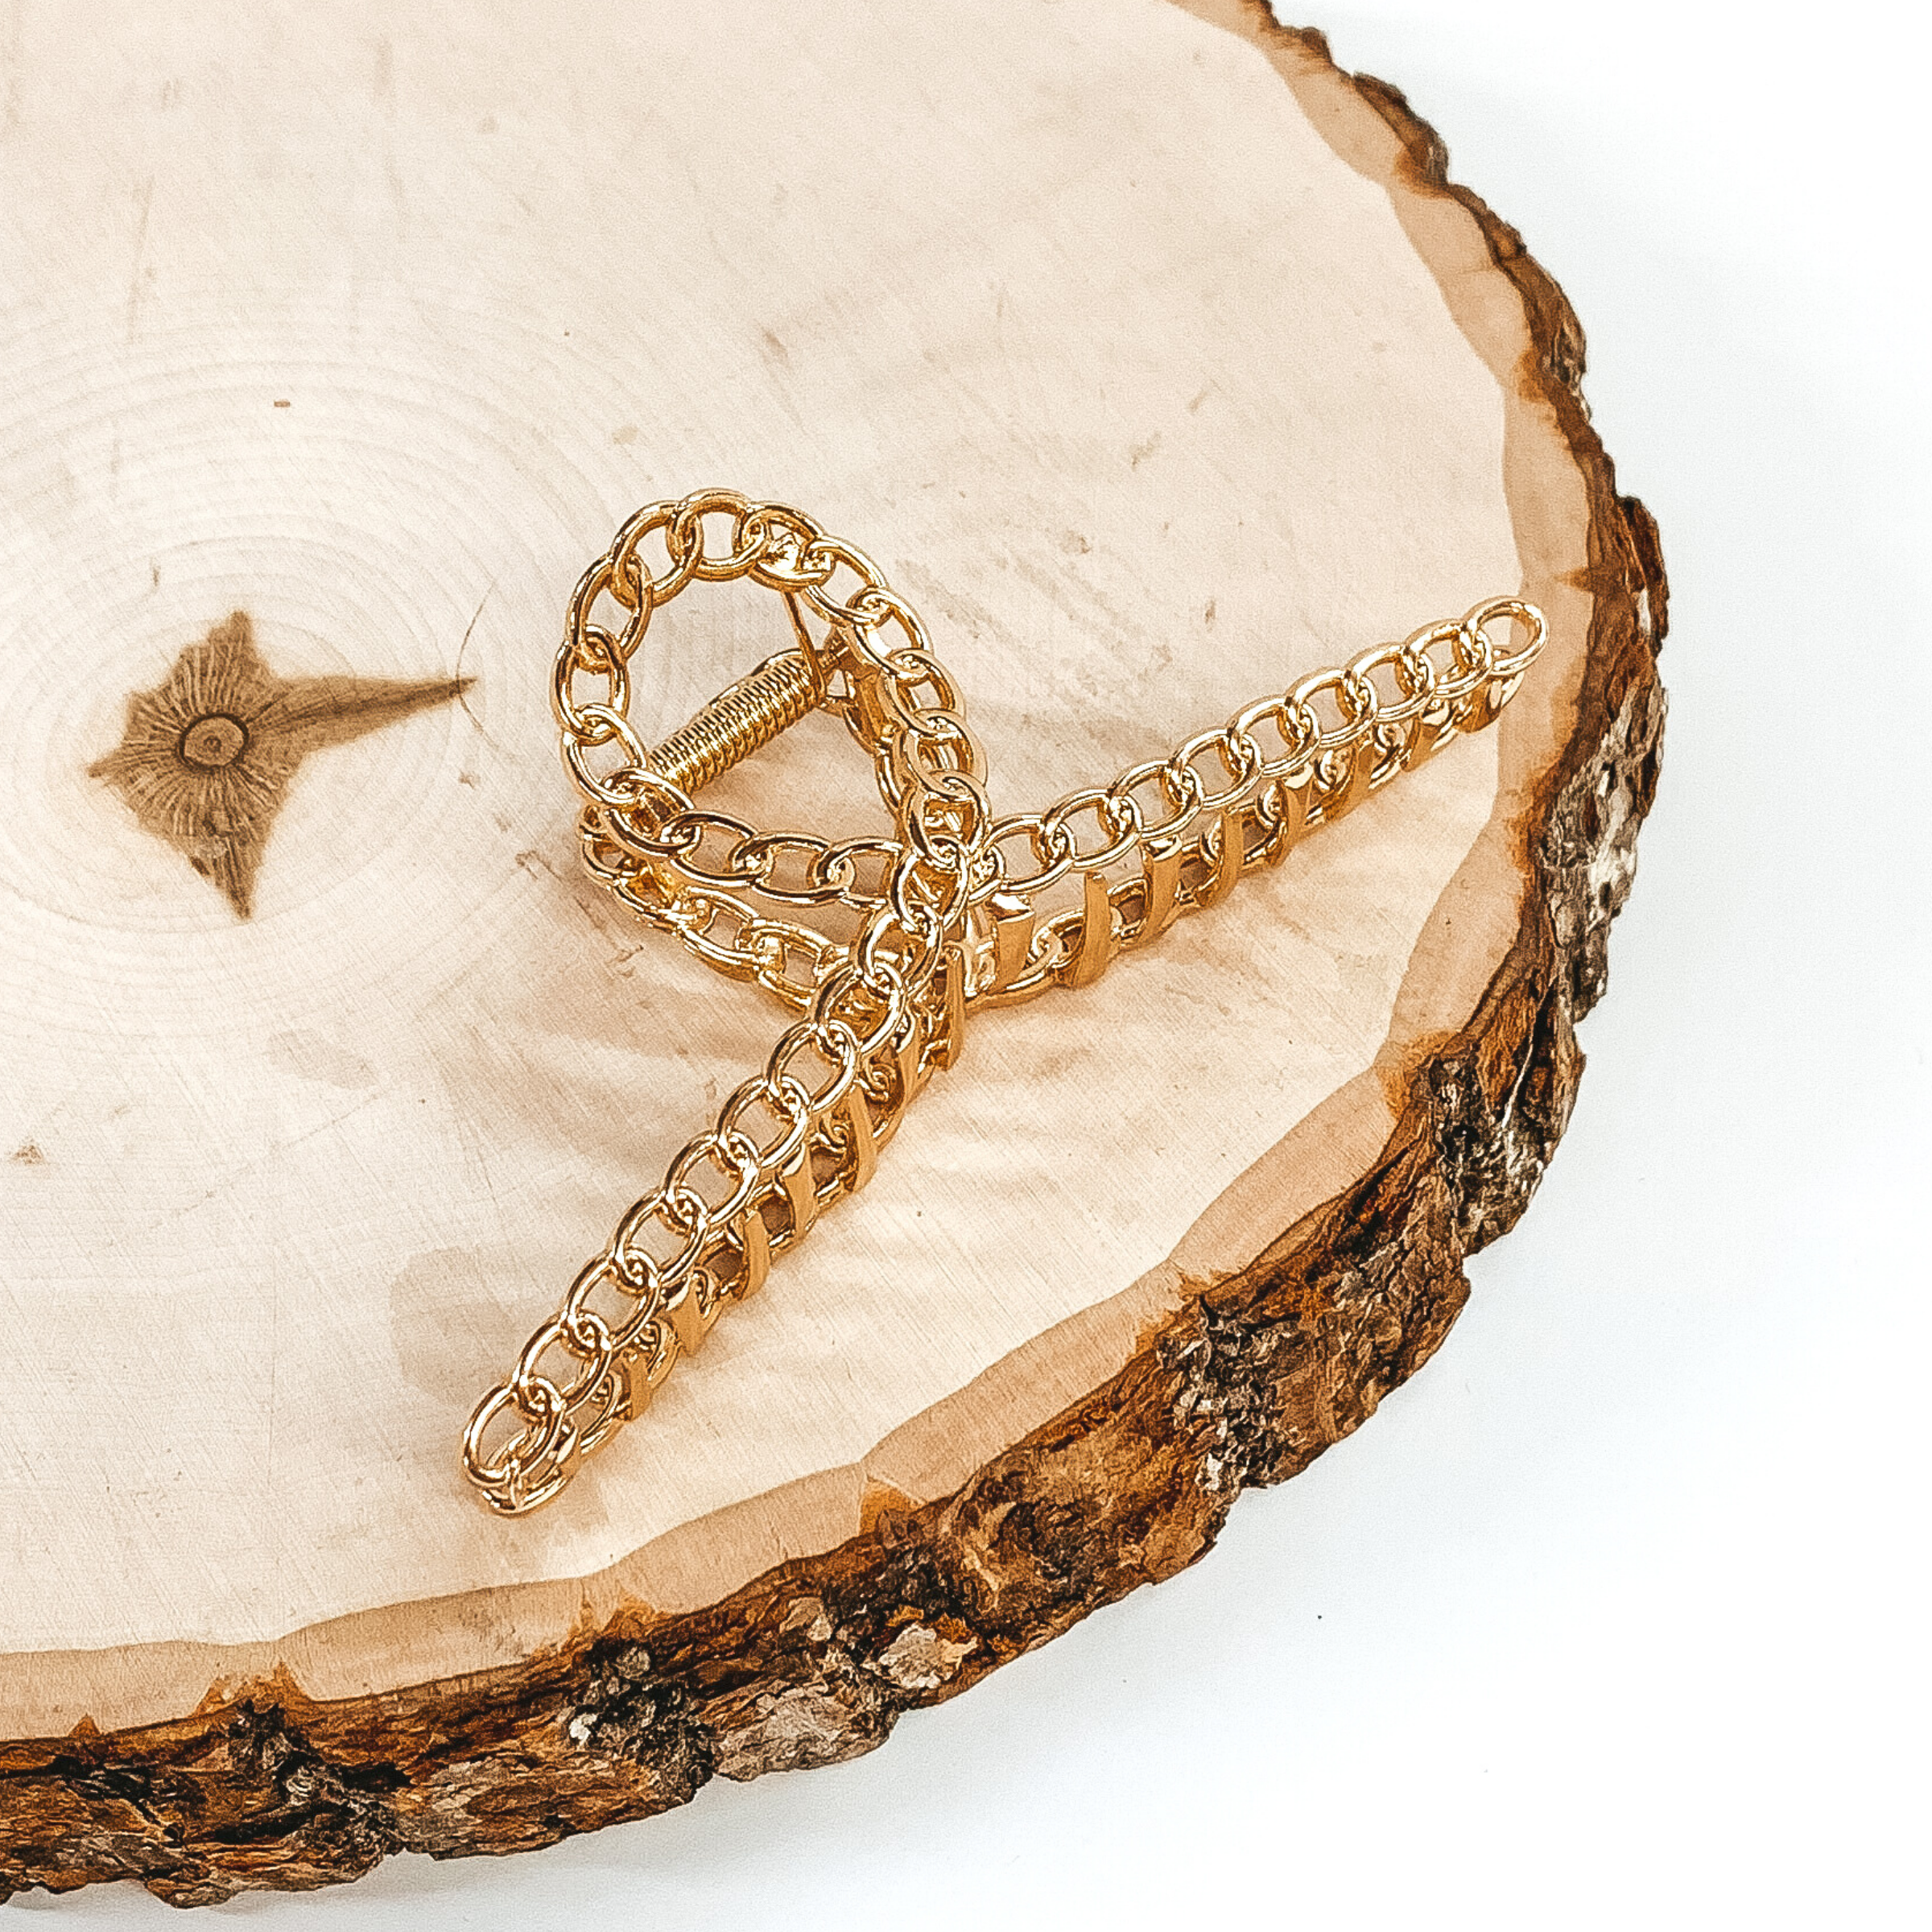 Shiny gold, chain linked clip. This clip is pictured laying on a piece of wood on a white background.